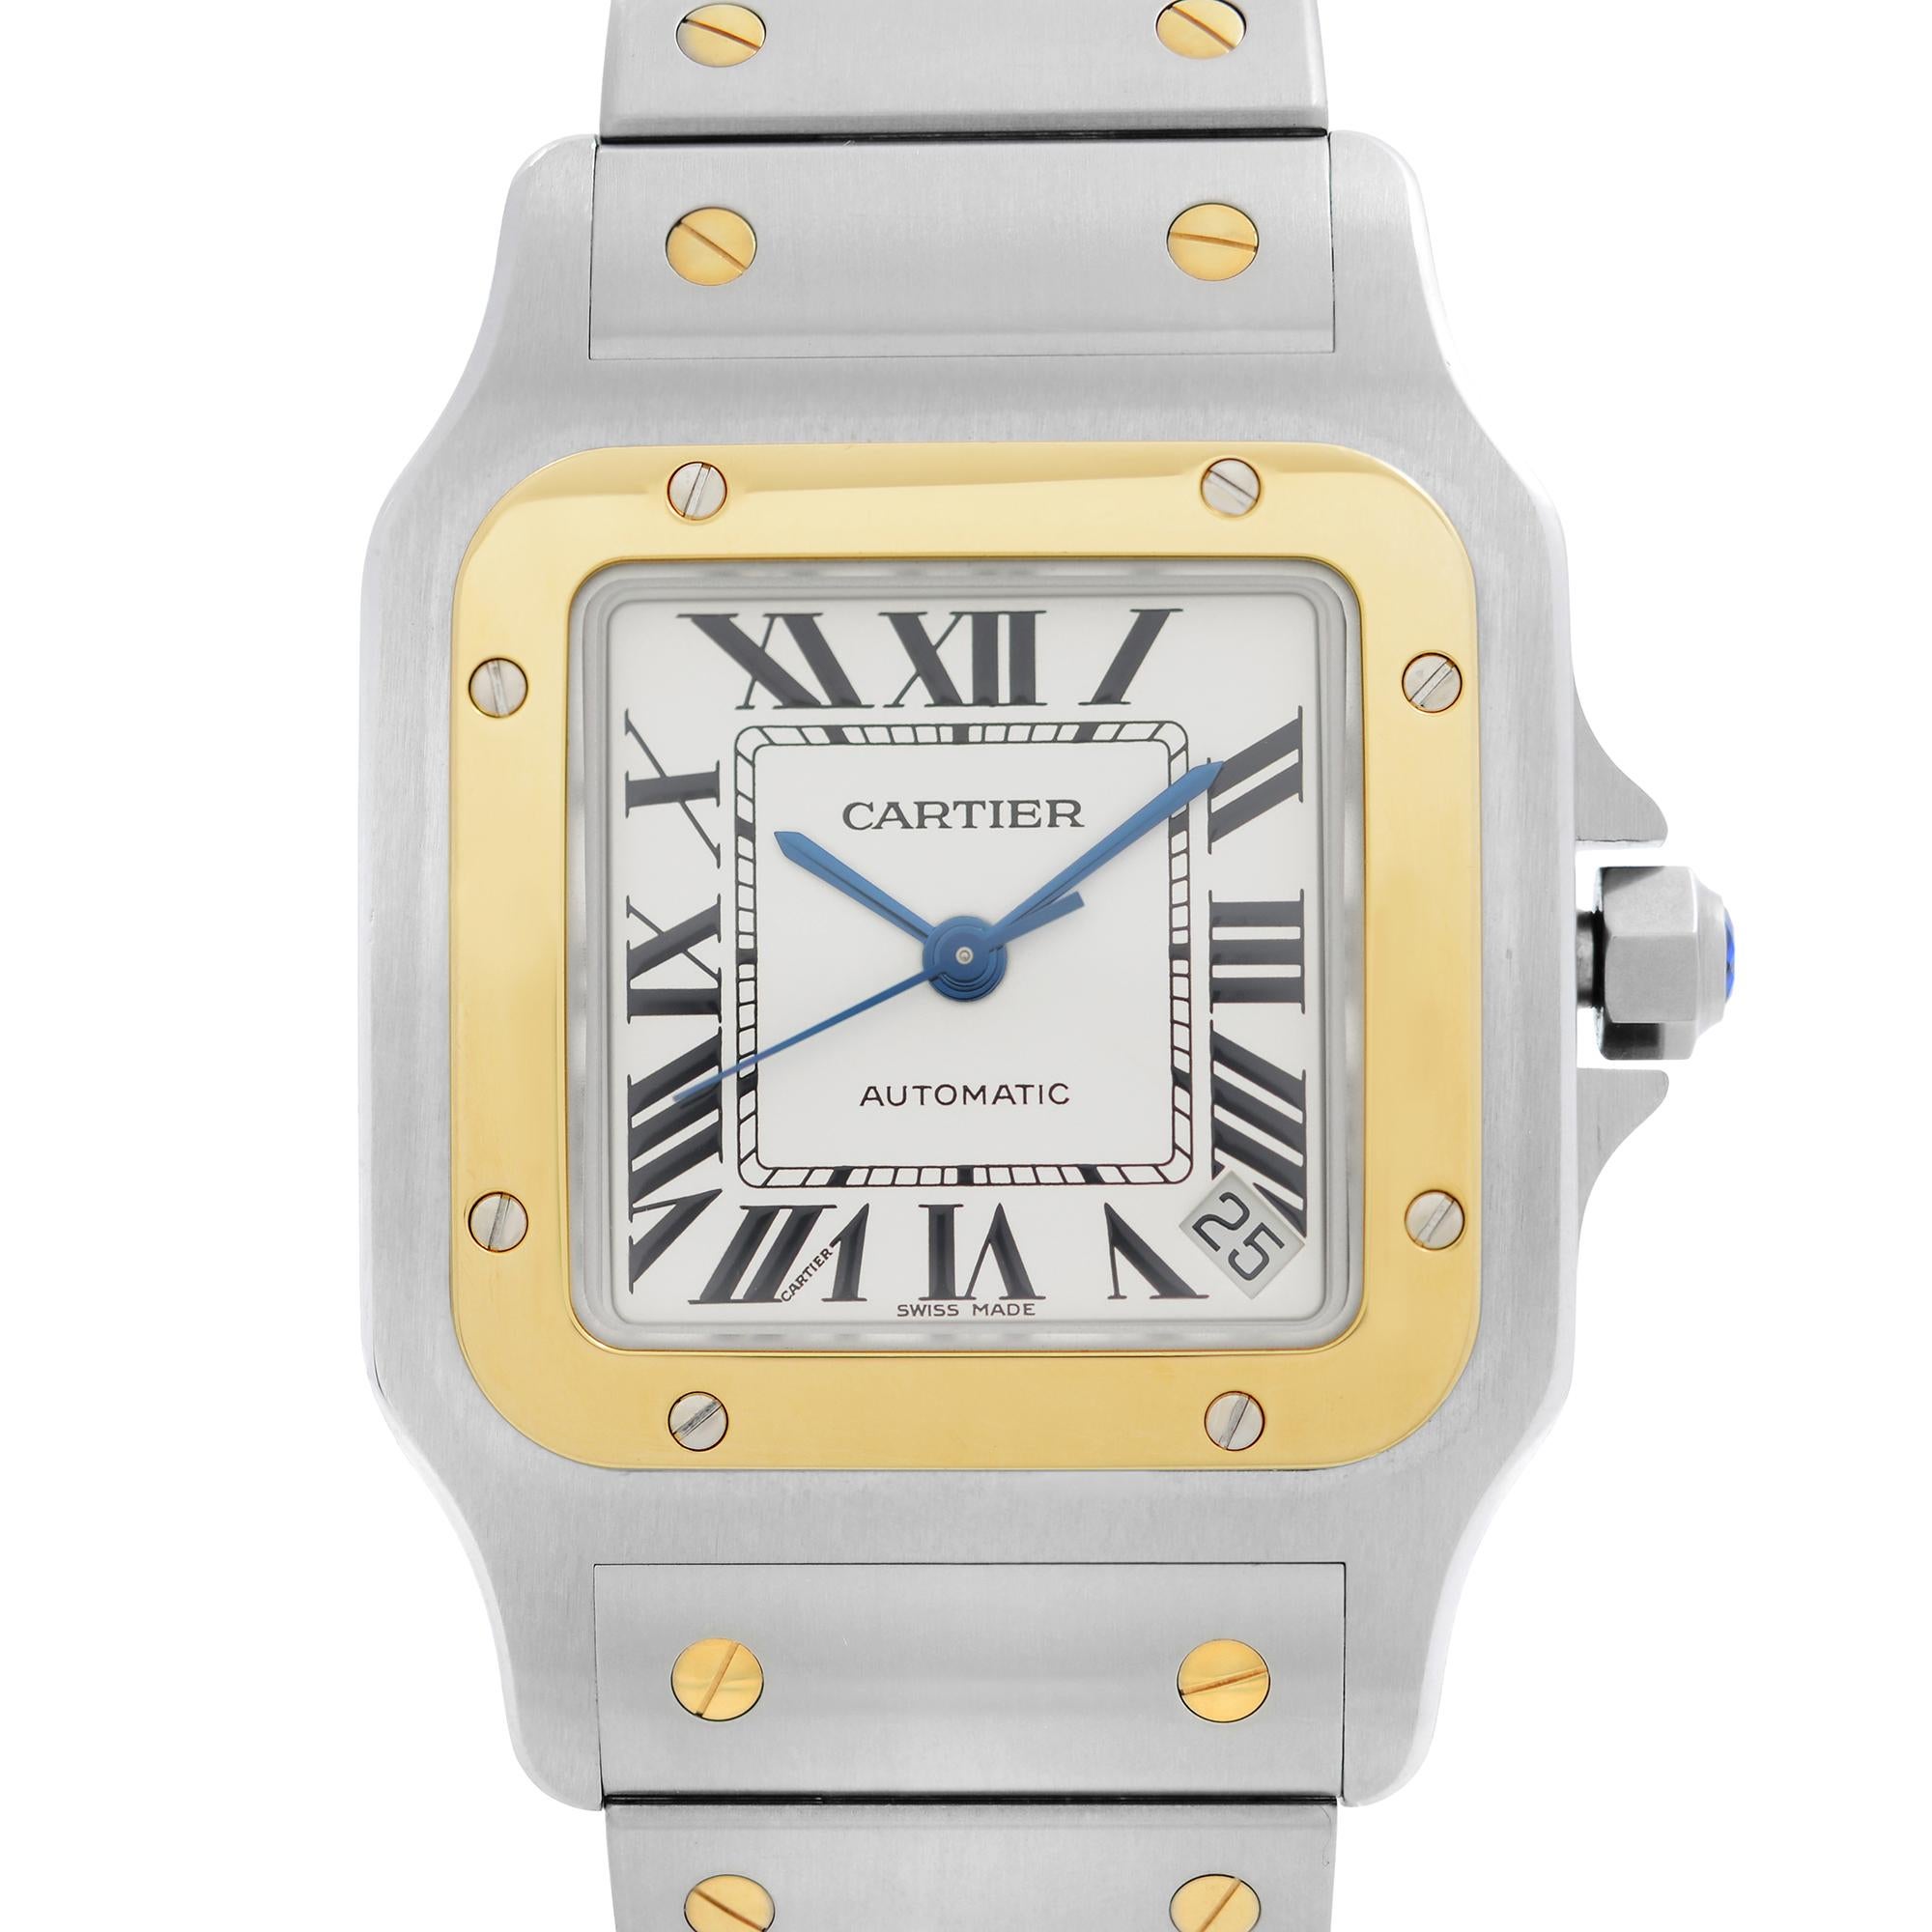 Store Display Model Cartier Santos Galbee 18k Yellow Gold Steel White Dial Men's Watch W20099C4. Original Box and Papers are Included. The Watch Might Have Some Blemishes During Store Display. Covered by 3-year Chronostore Warranty. 
Details:
Brand